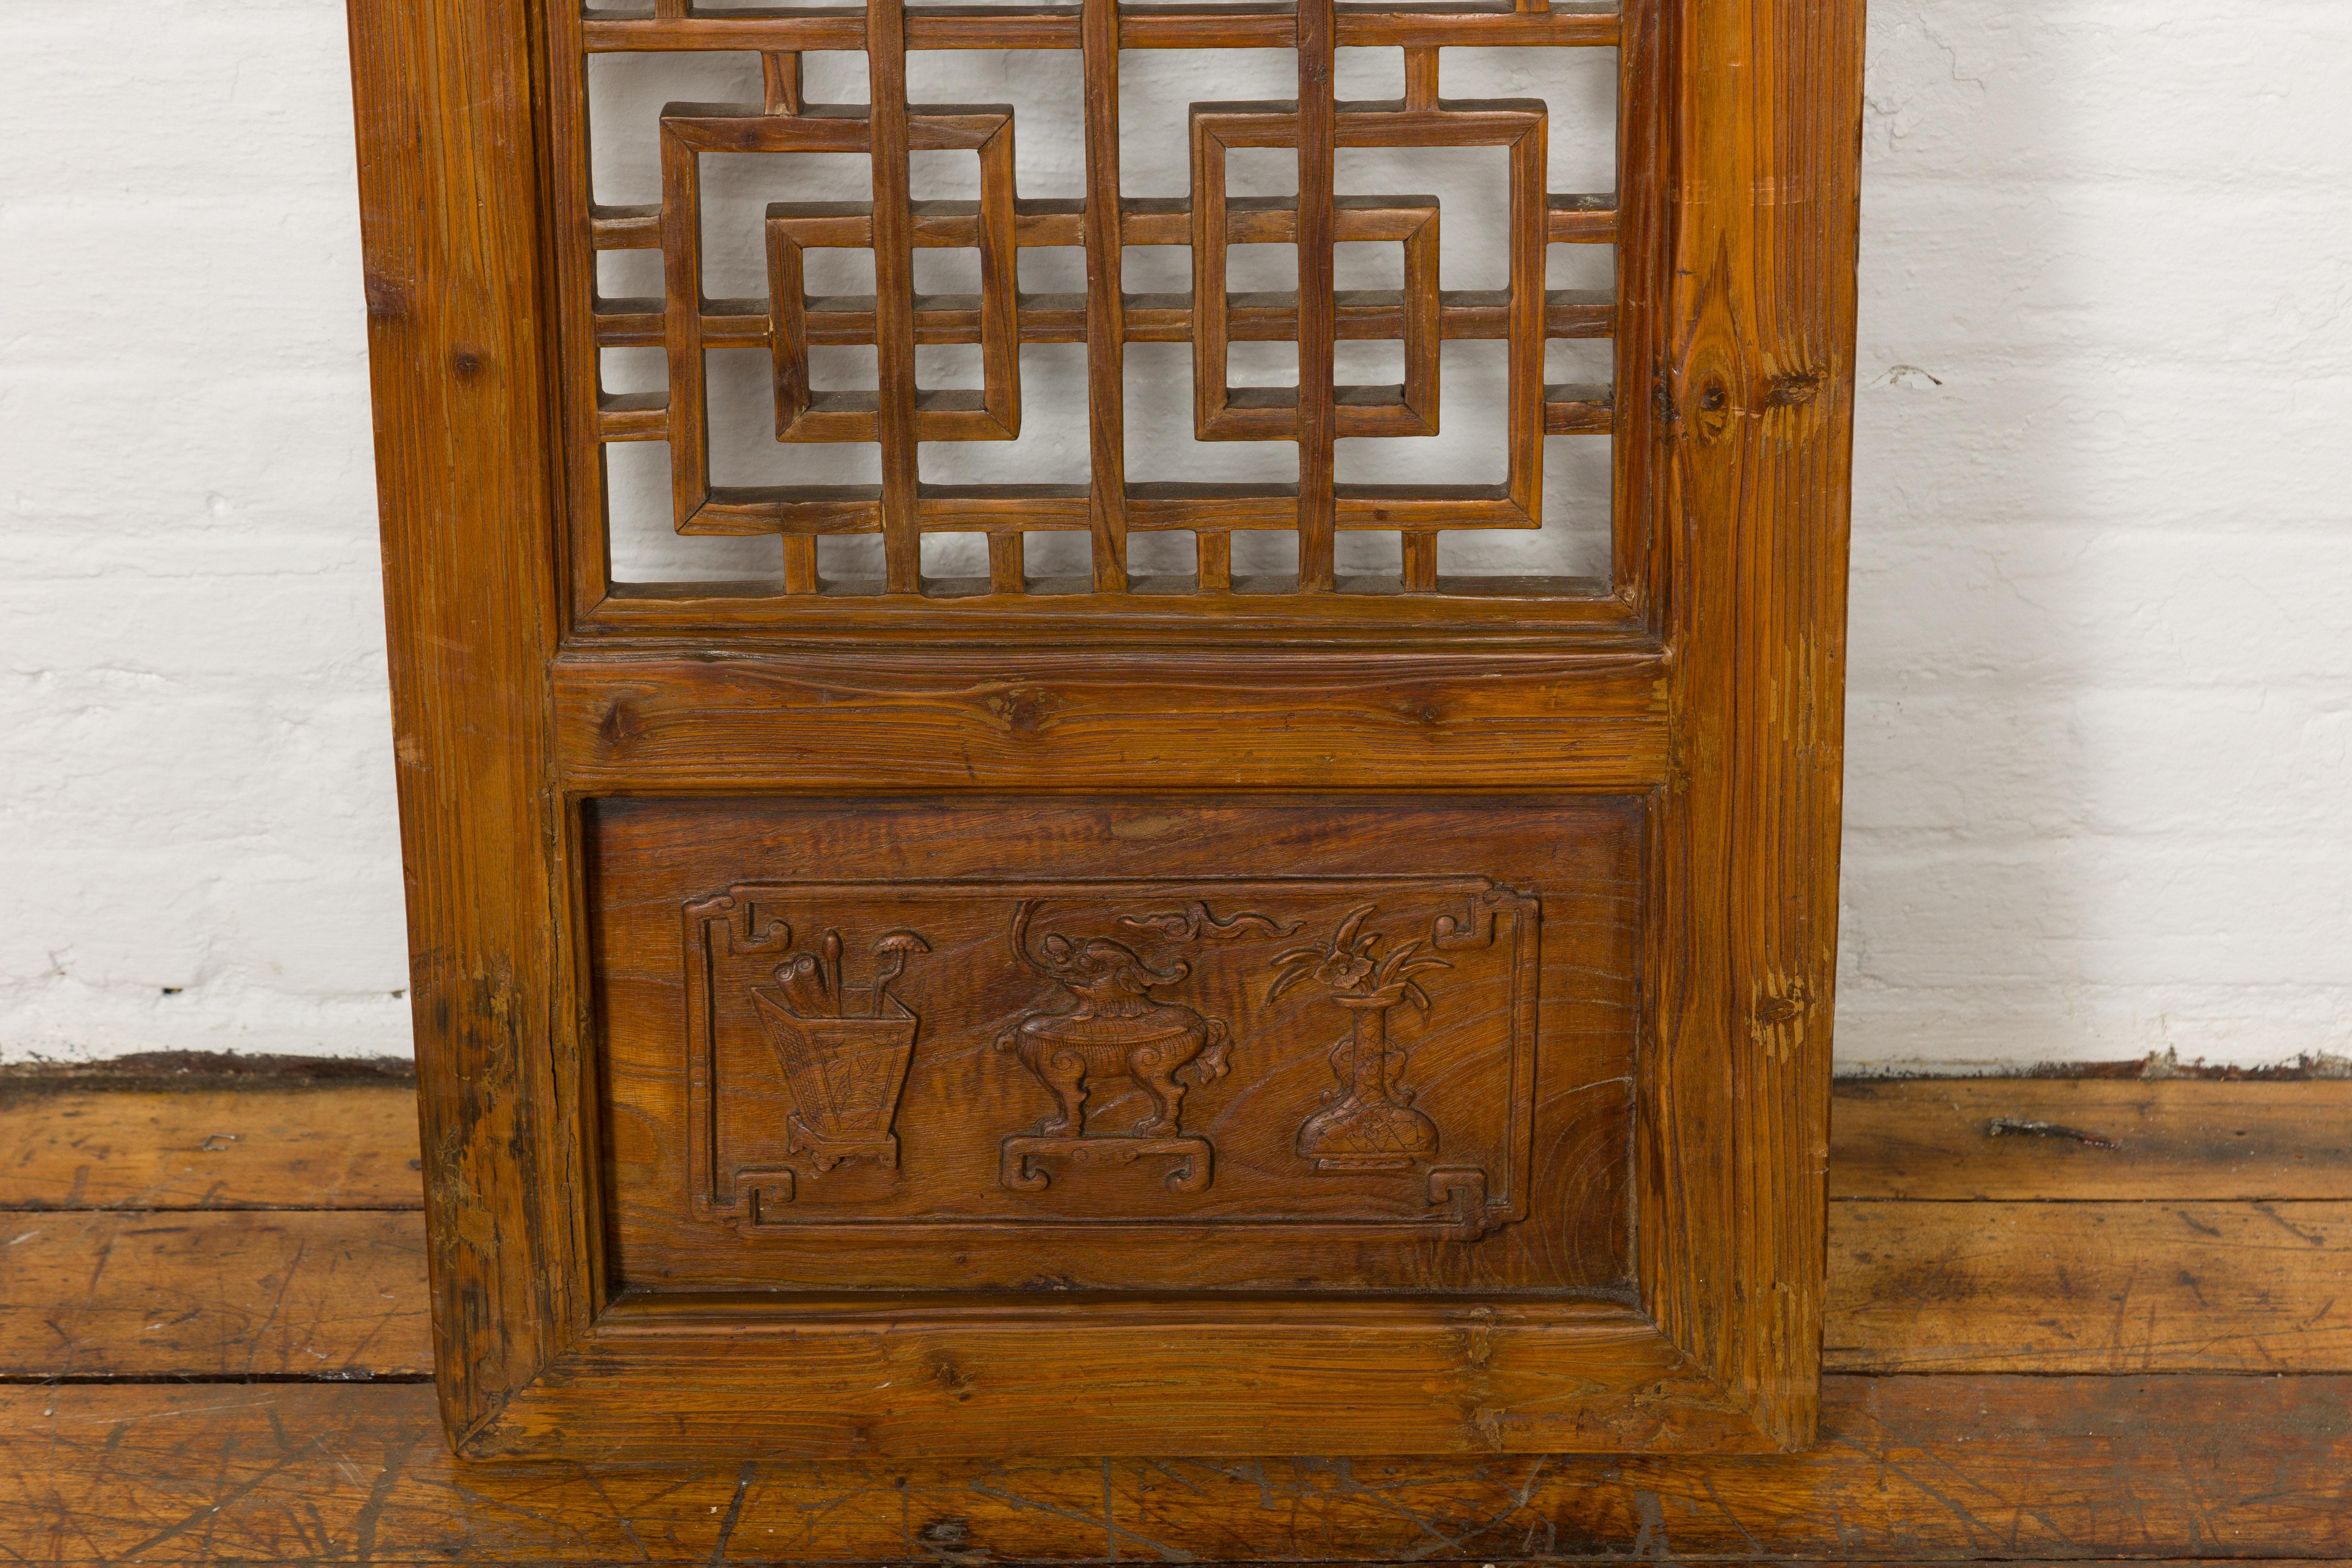 Chinese Qing Dynasty 19th Century Fretwork Screen with Carved Scrolling Motifs For Sale 14